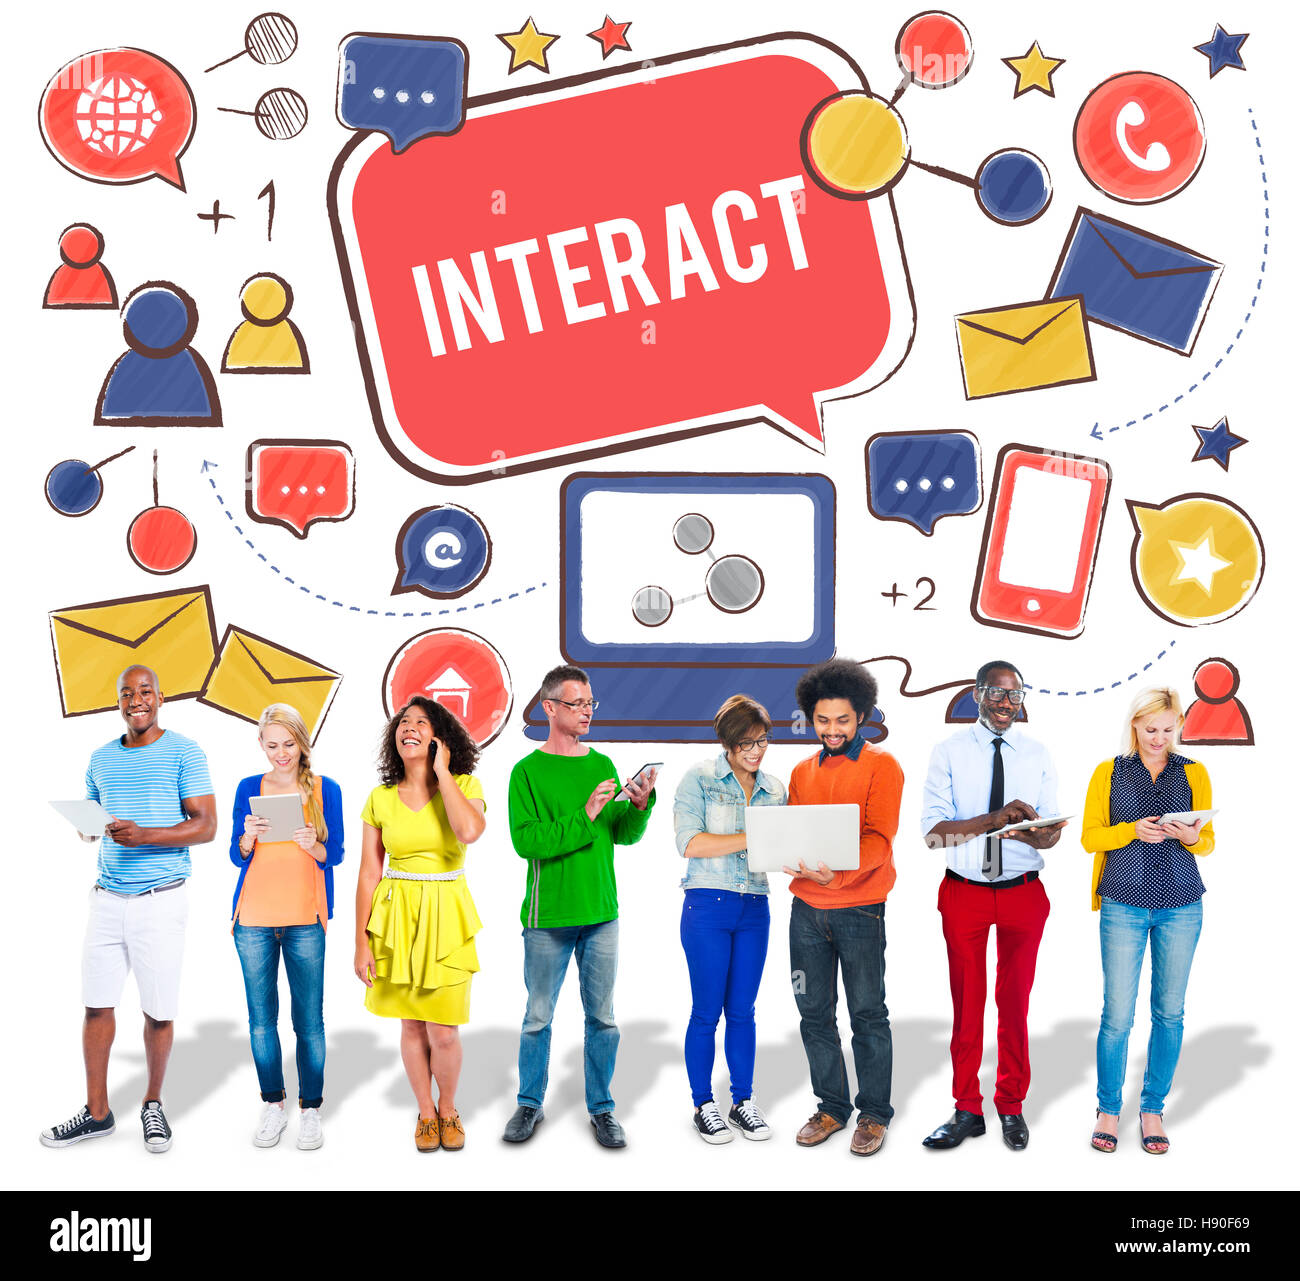 Interact Communicate Connect Social Media Social Networking Concept Stock Photo